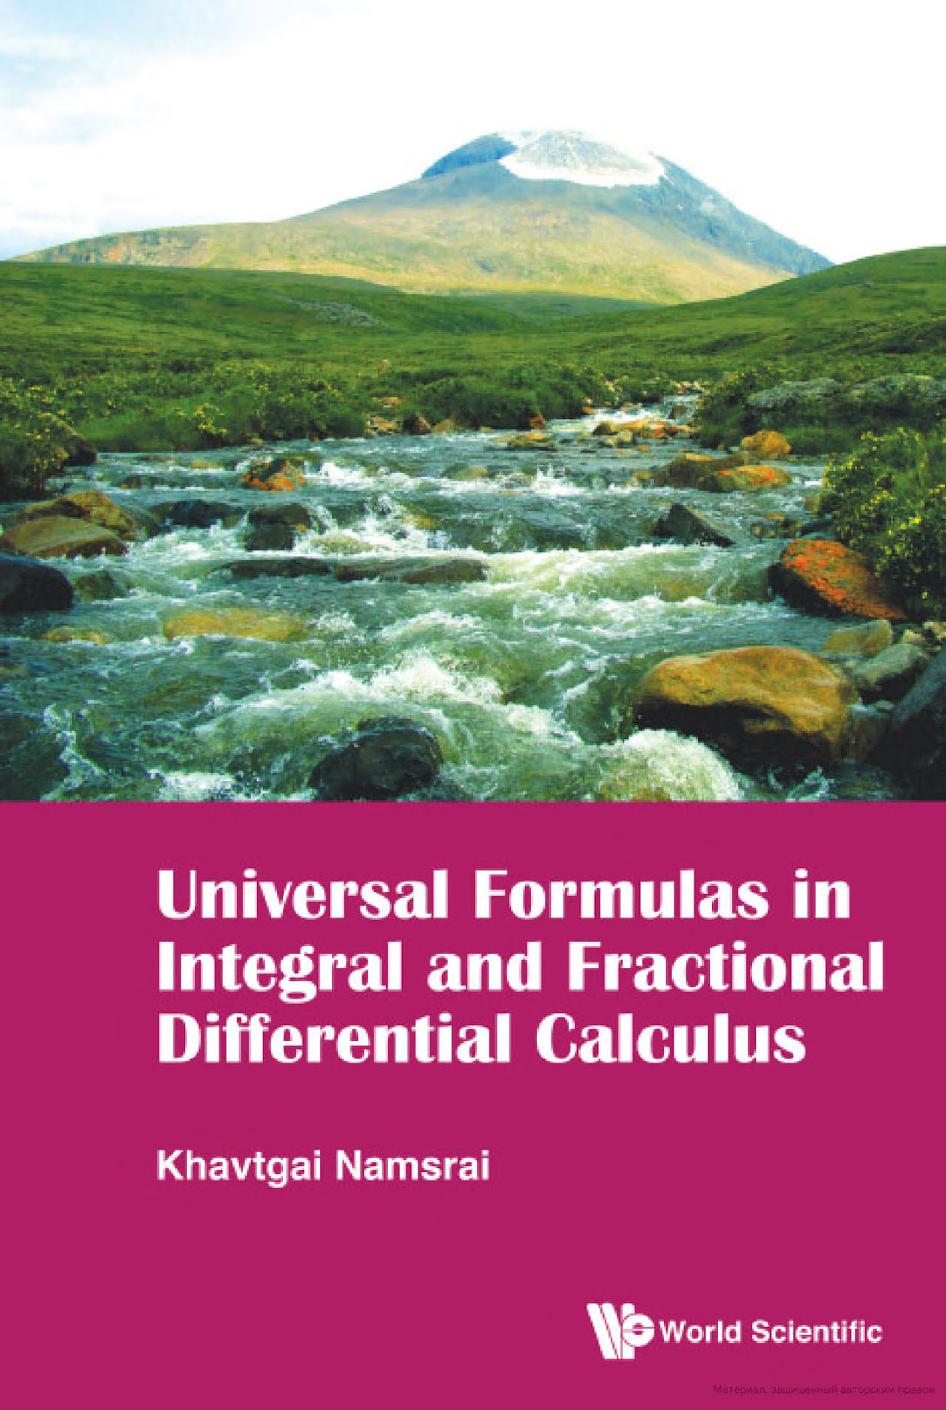 Universal Formulas in Integral and Fractional Differential Calculus-World Scientific (2016)